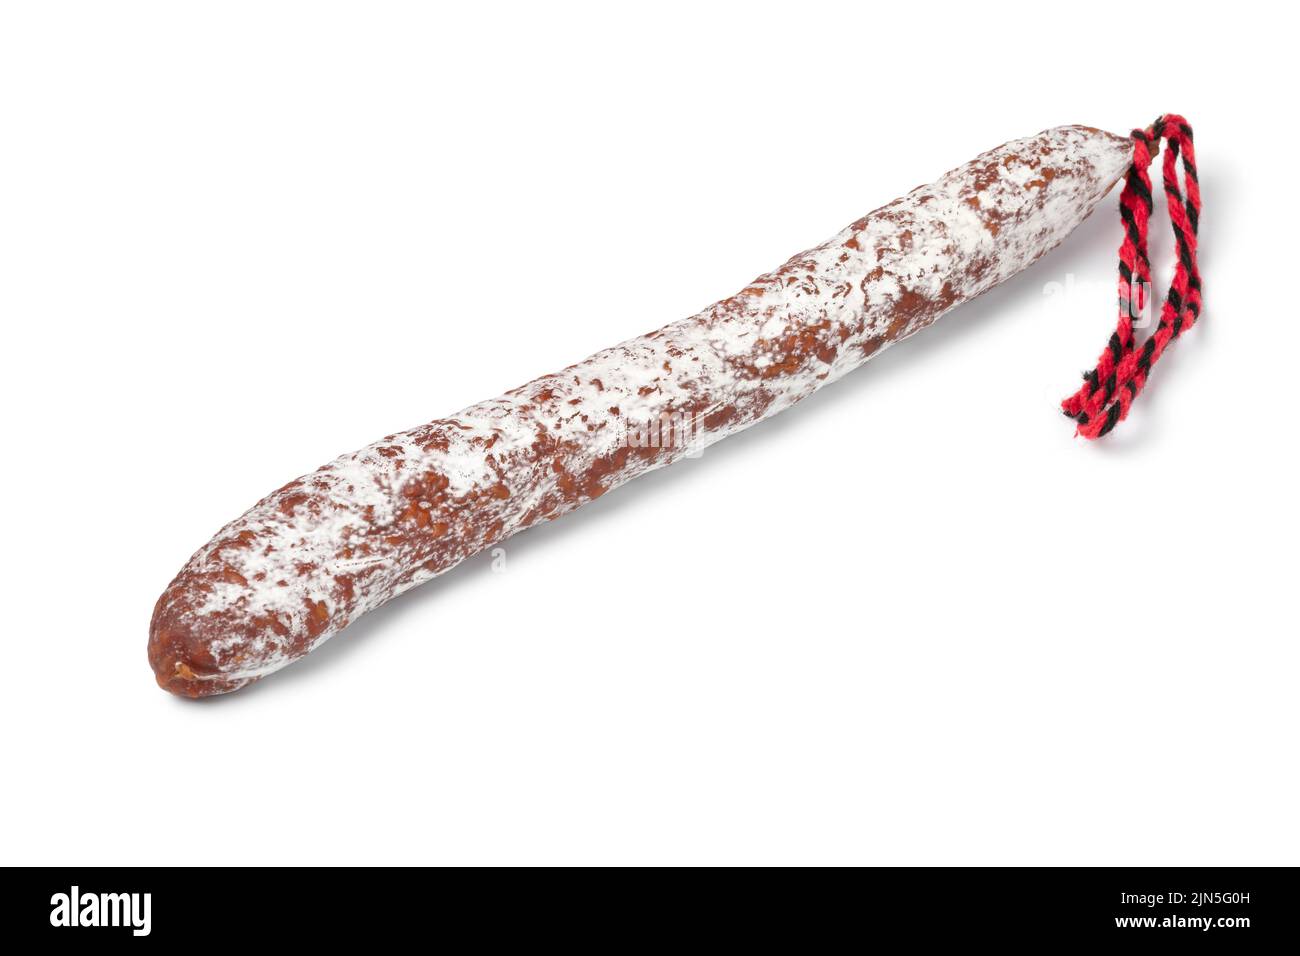 Traditional Catalan chorizo sausage, fuet, isoloated on white background close up Stock Photo